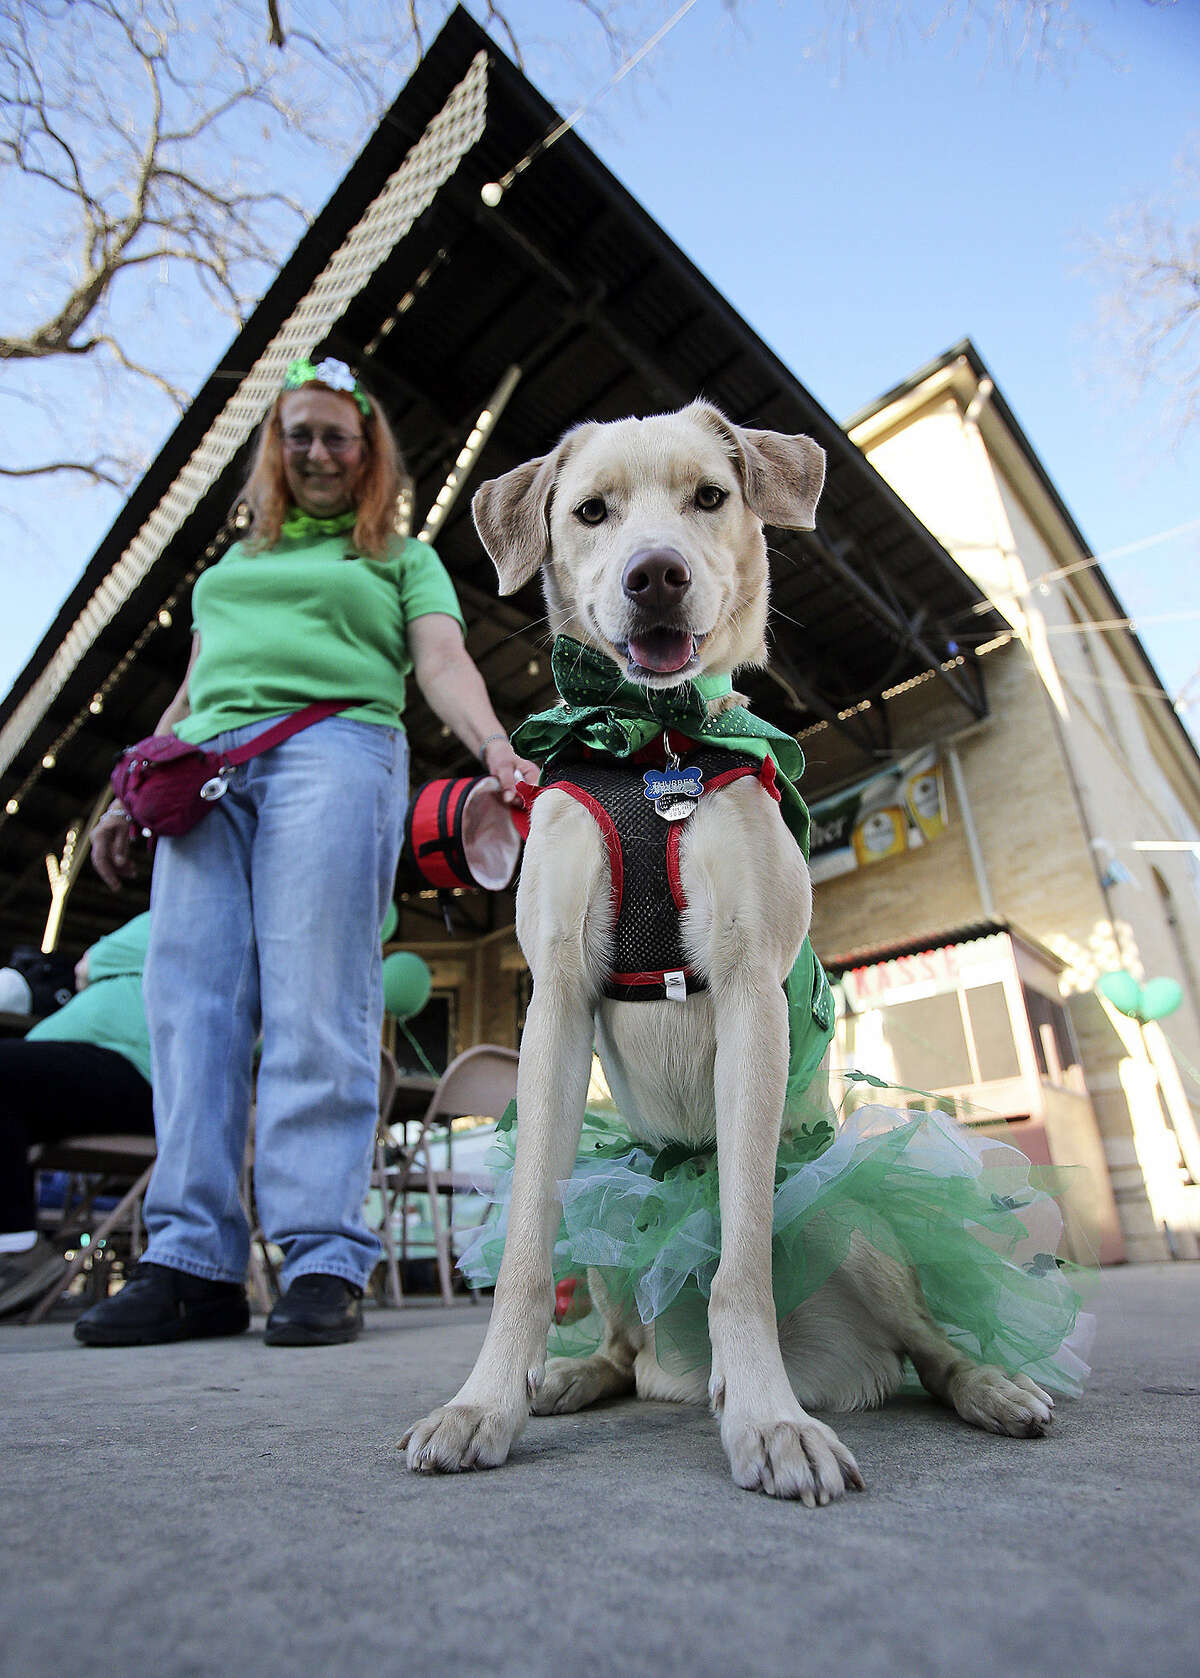 “Thurber” stands in his Irish garb with owner Christine Saalbach.